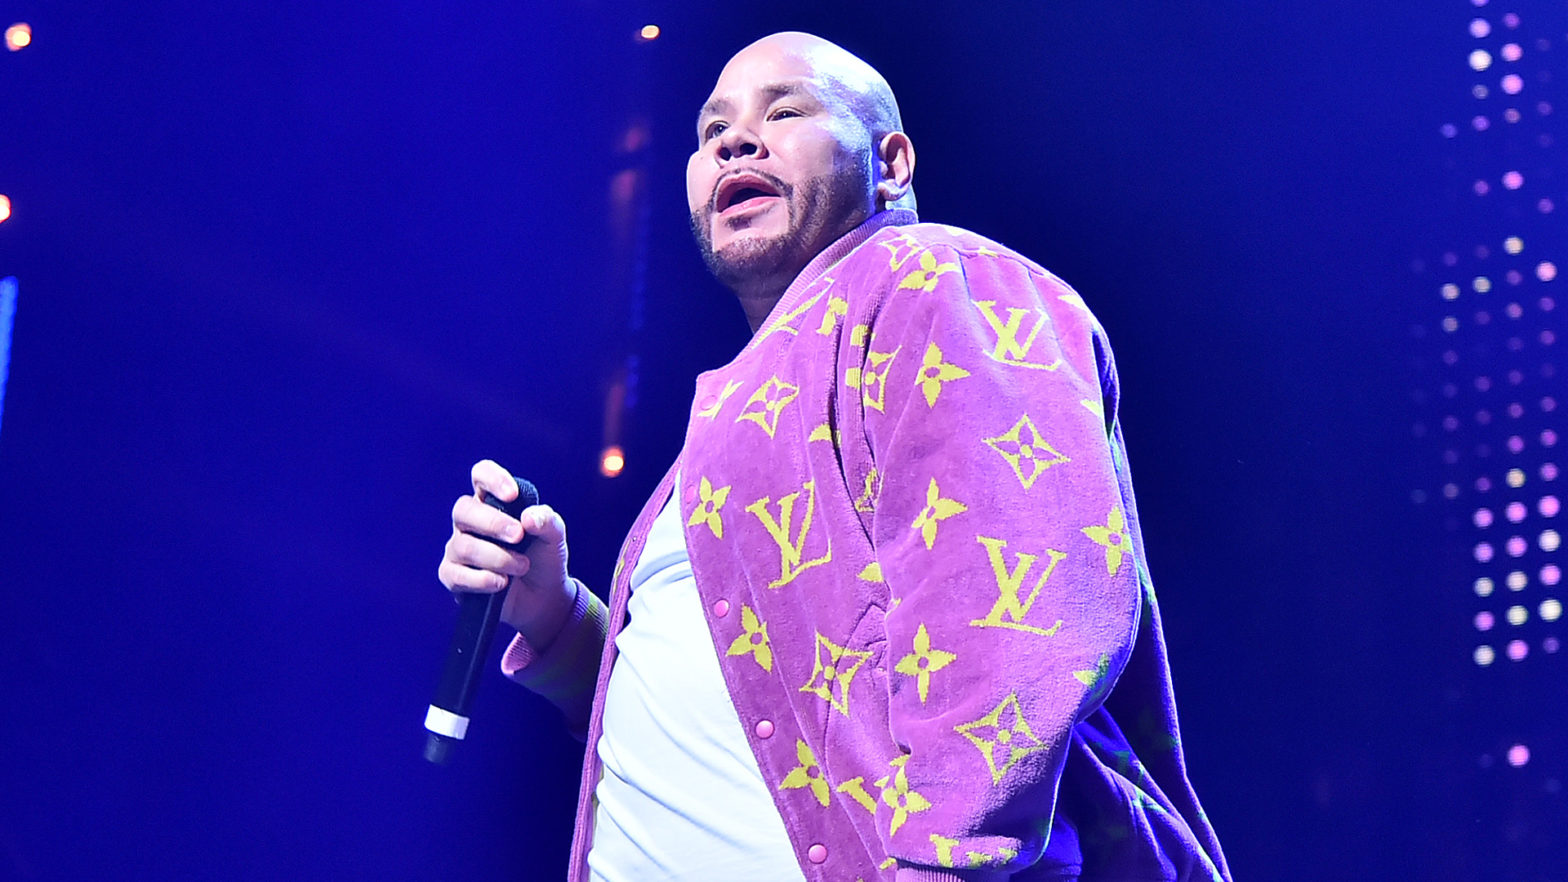 Fat Joe Files Lawsuit Against Accountants For Allegedly Stealing Millions Of Dollars In A 'Fraudulent Scheme'